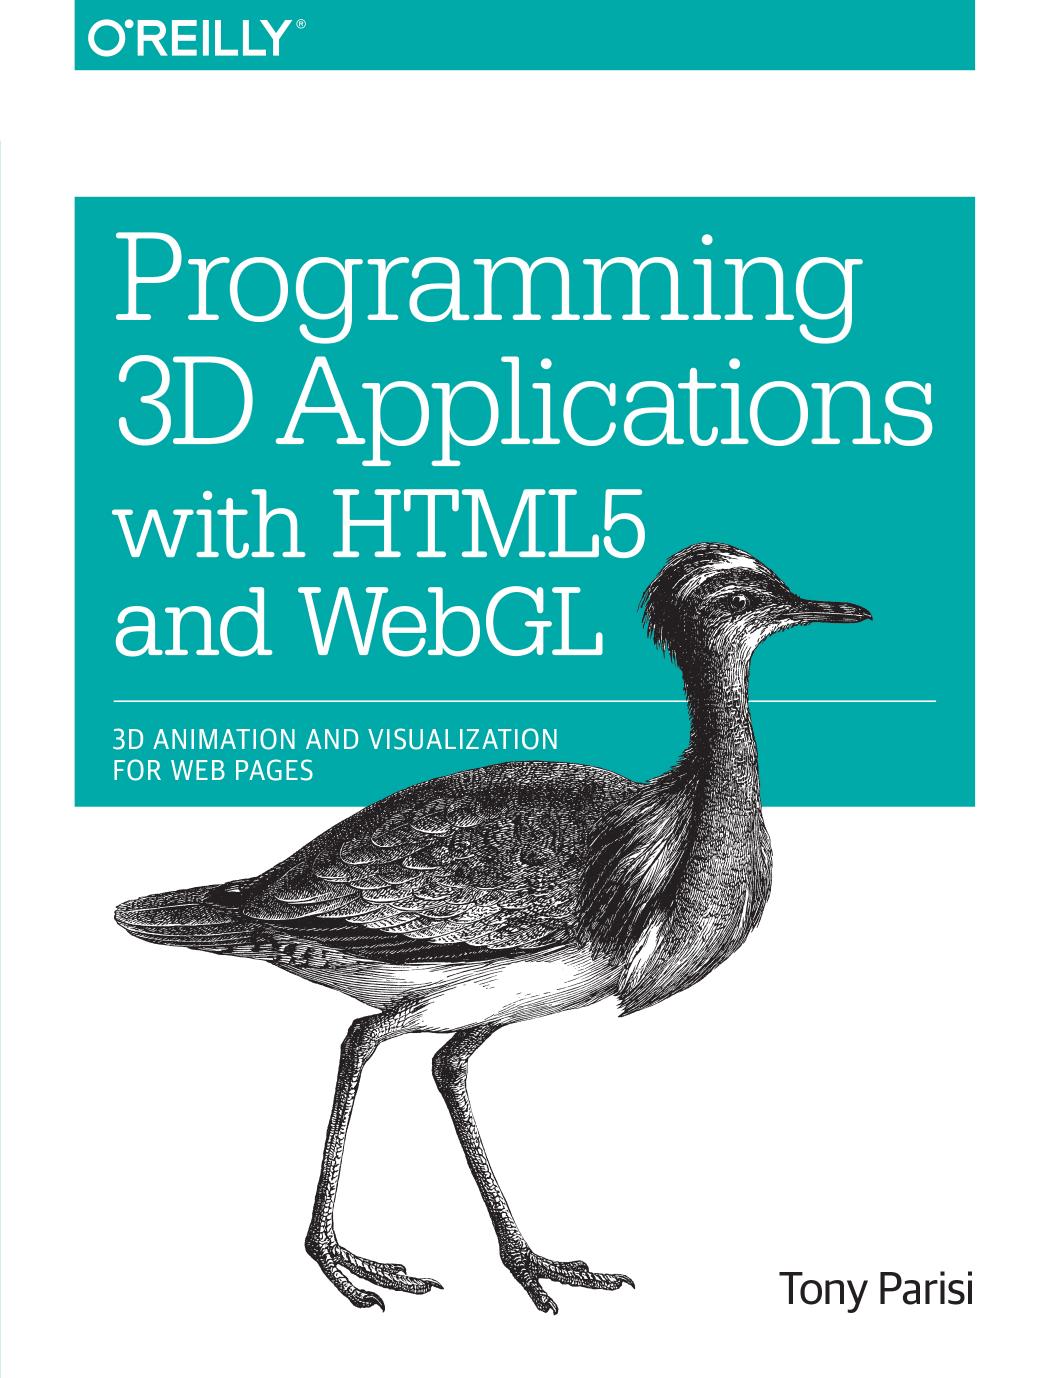 Programming 3D Applications With HTML5 and WebGL: 3D Animation and Visualization for Web Pages